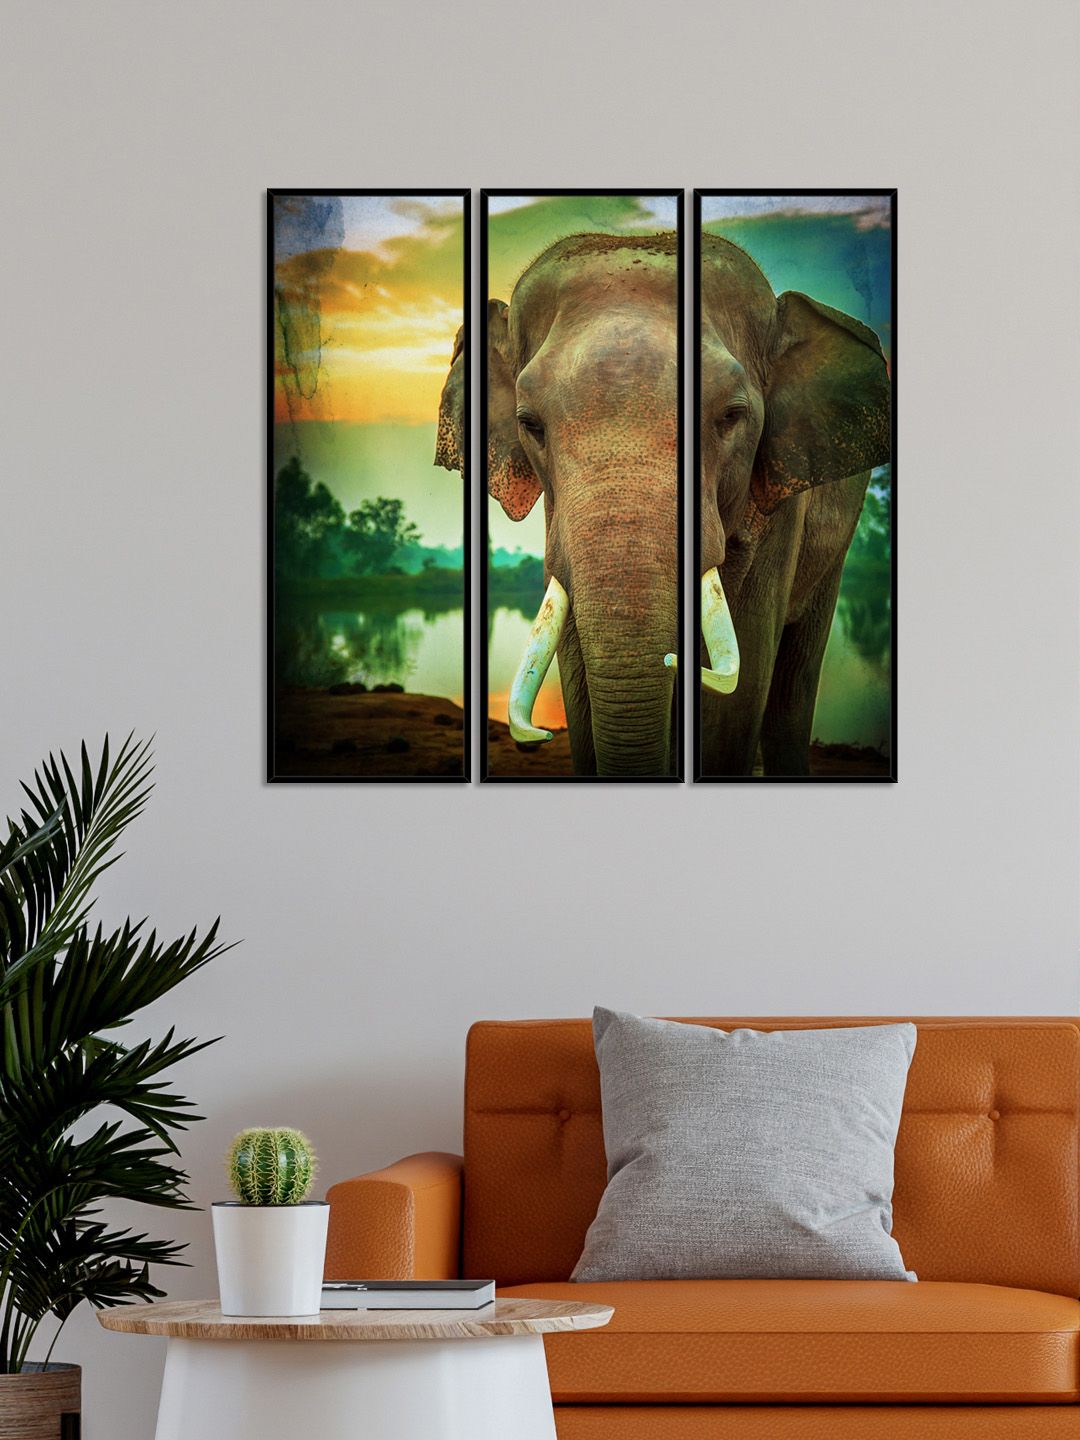 999Store Set Of 3 Beautiful Elephant Framed Wall Art Paintings Price in India